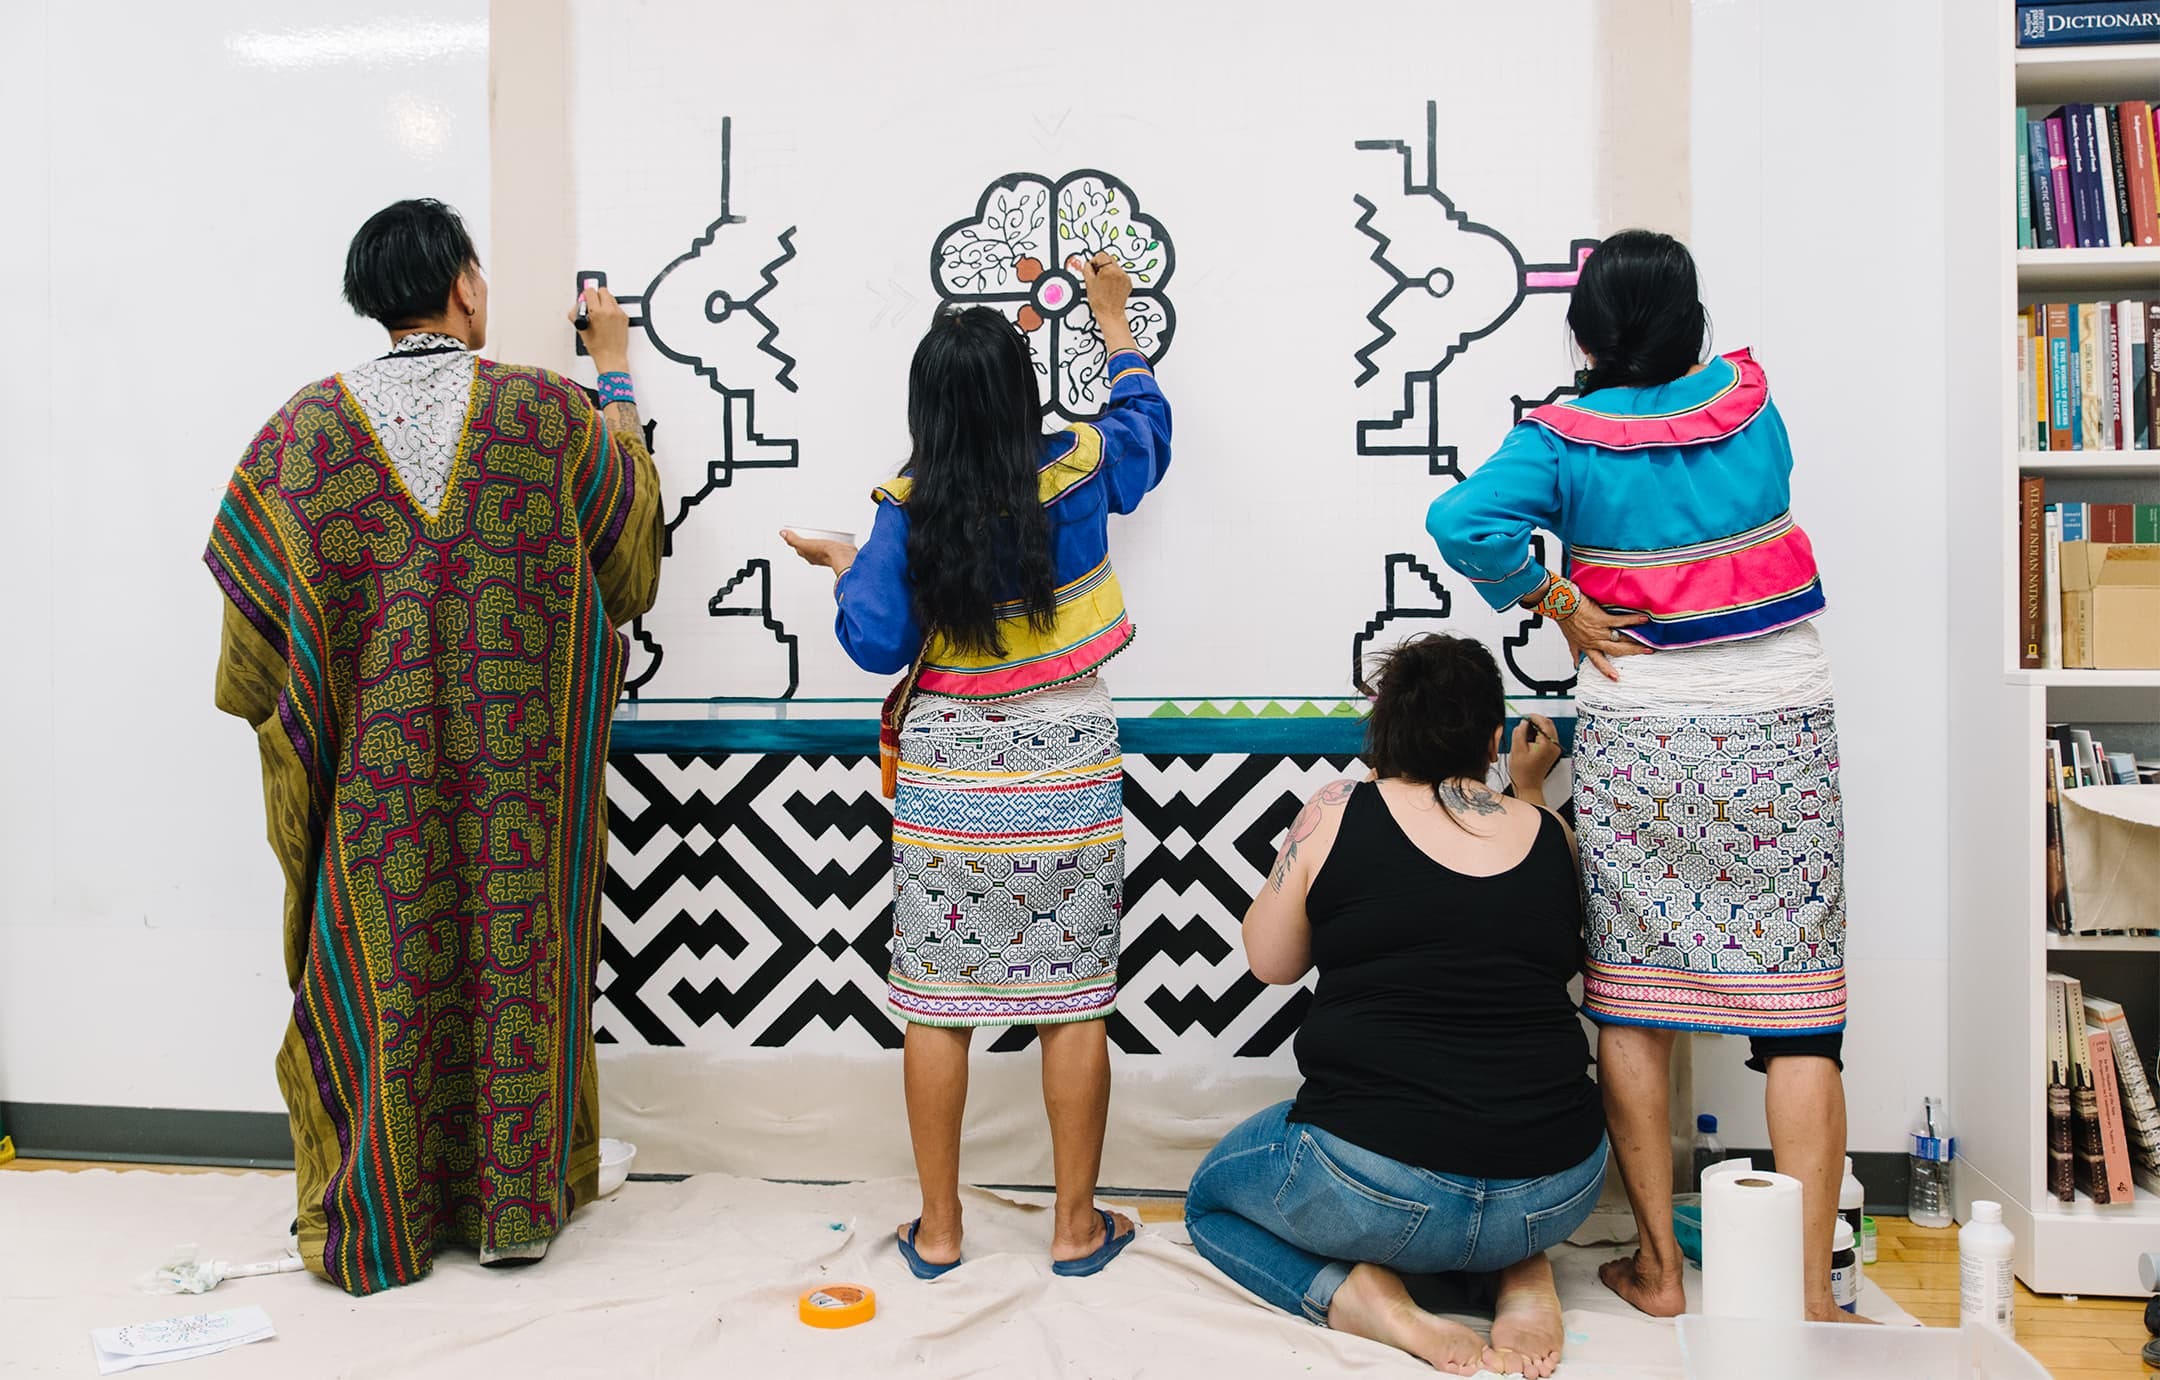 Four figures, three of whom are standing and wearing Indigenous dress and another on their knees in jeans and a black tank top, outline and color in the beginning of a wall design that has distinctly Indigenous graphic markings. (Photo: Stef & Ethan)